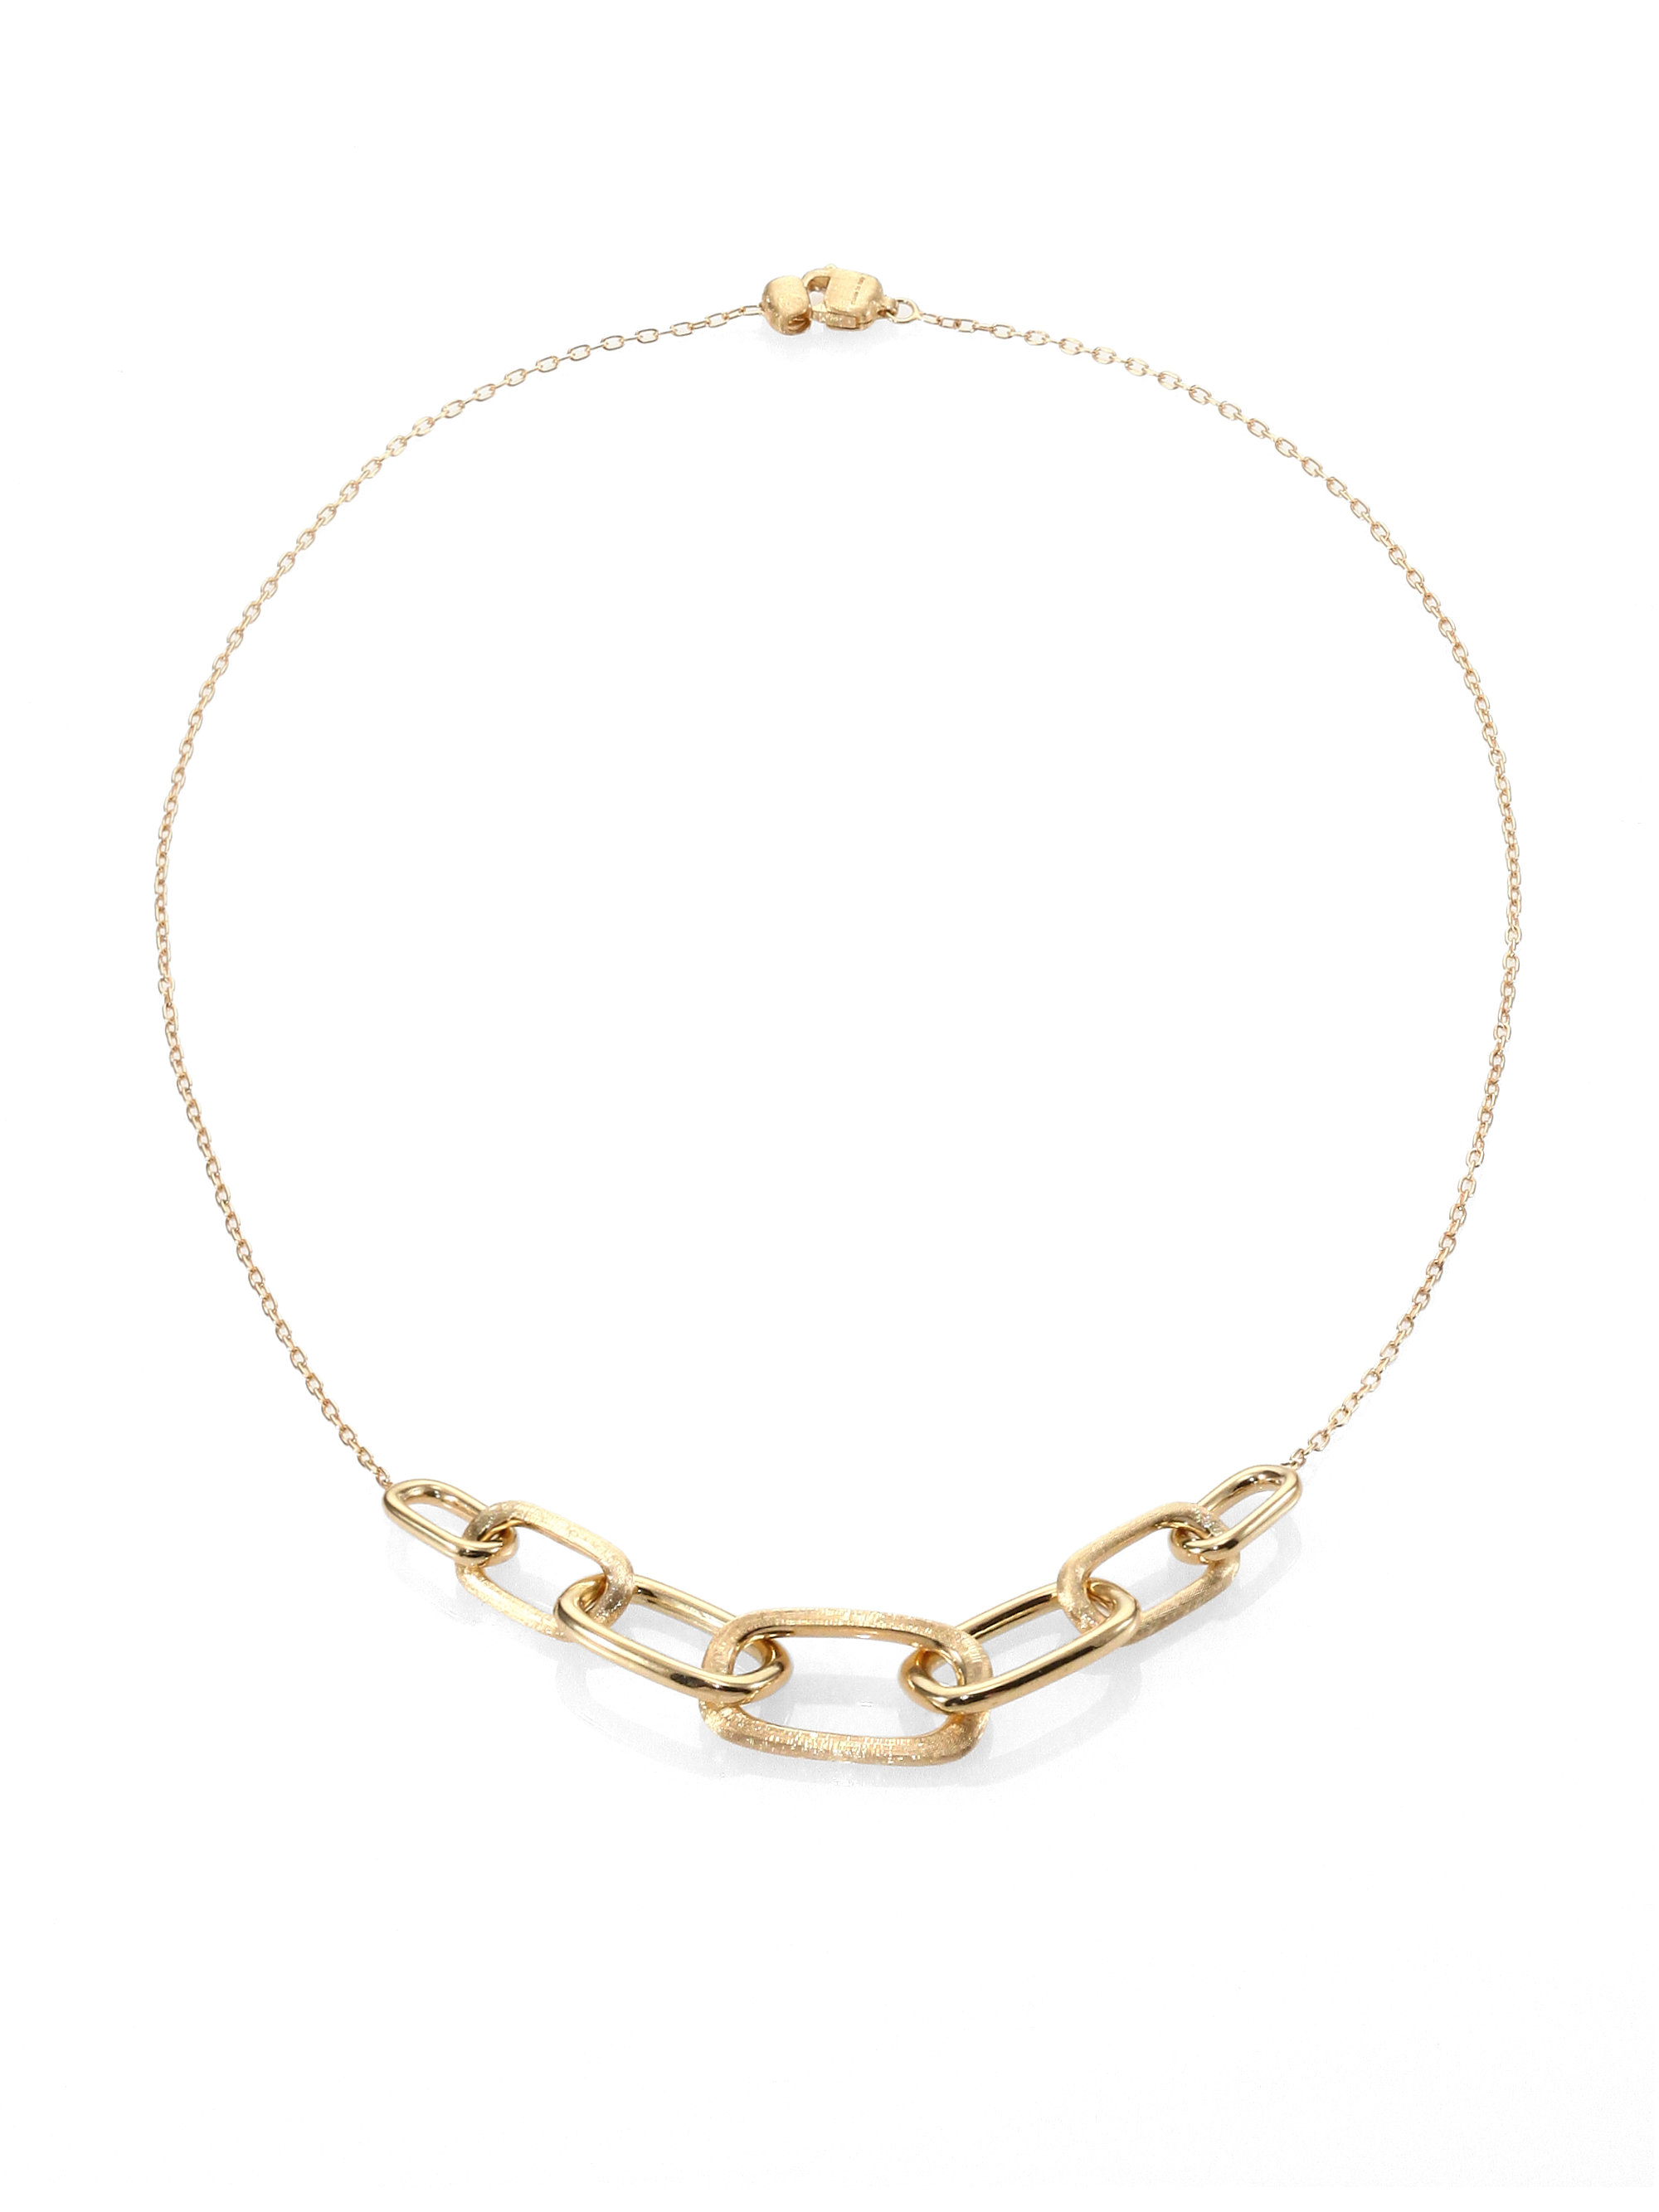 Lyst - Marco Bicego Murano 18k Yellow Gold Link Necklace in Metallic